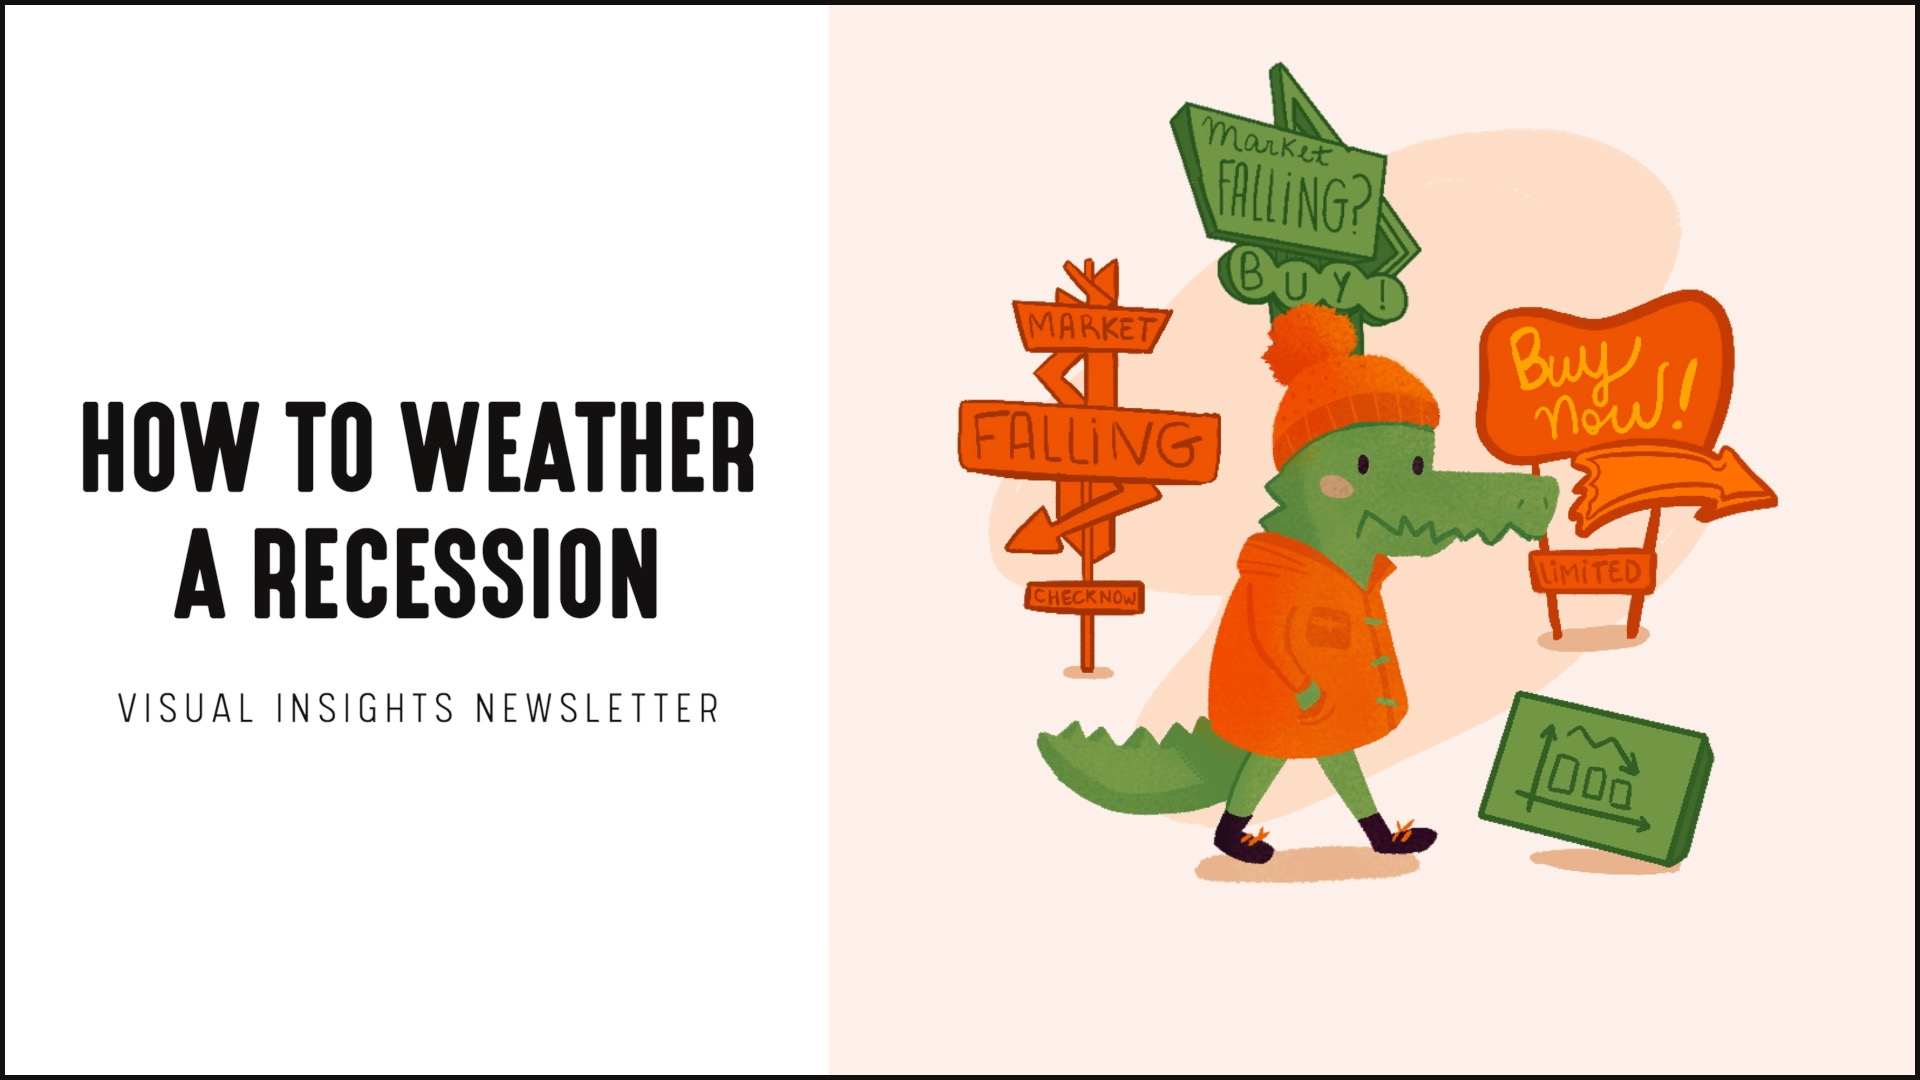 [NEW] How to Weather a Recession - Visual Insights Newsletter